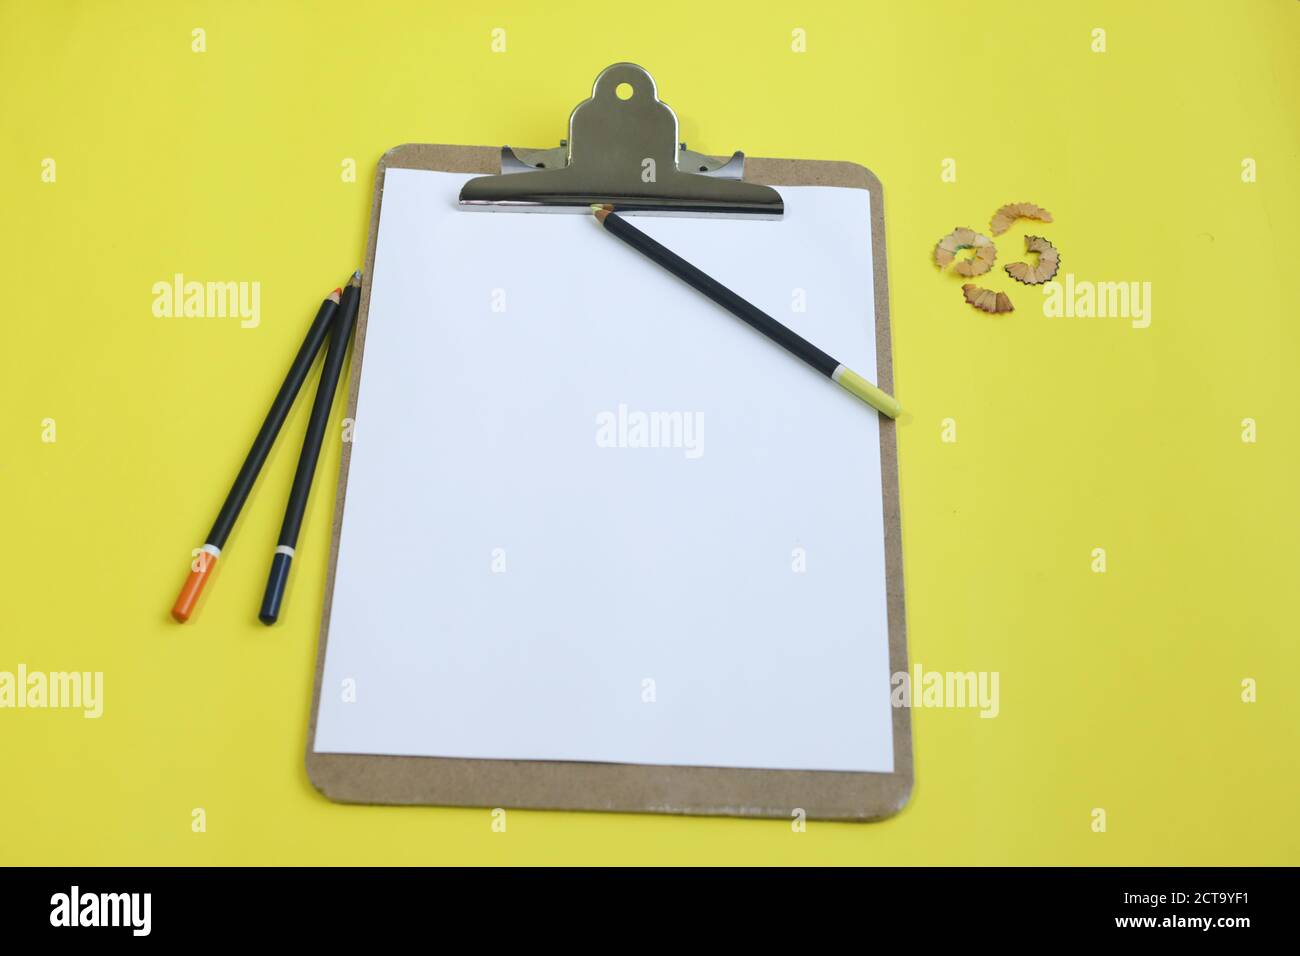 Shot of a drawing board with colorful  pencils on a yellow background Stock Photo